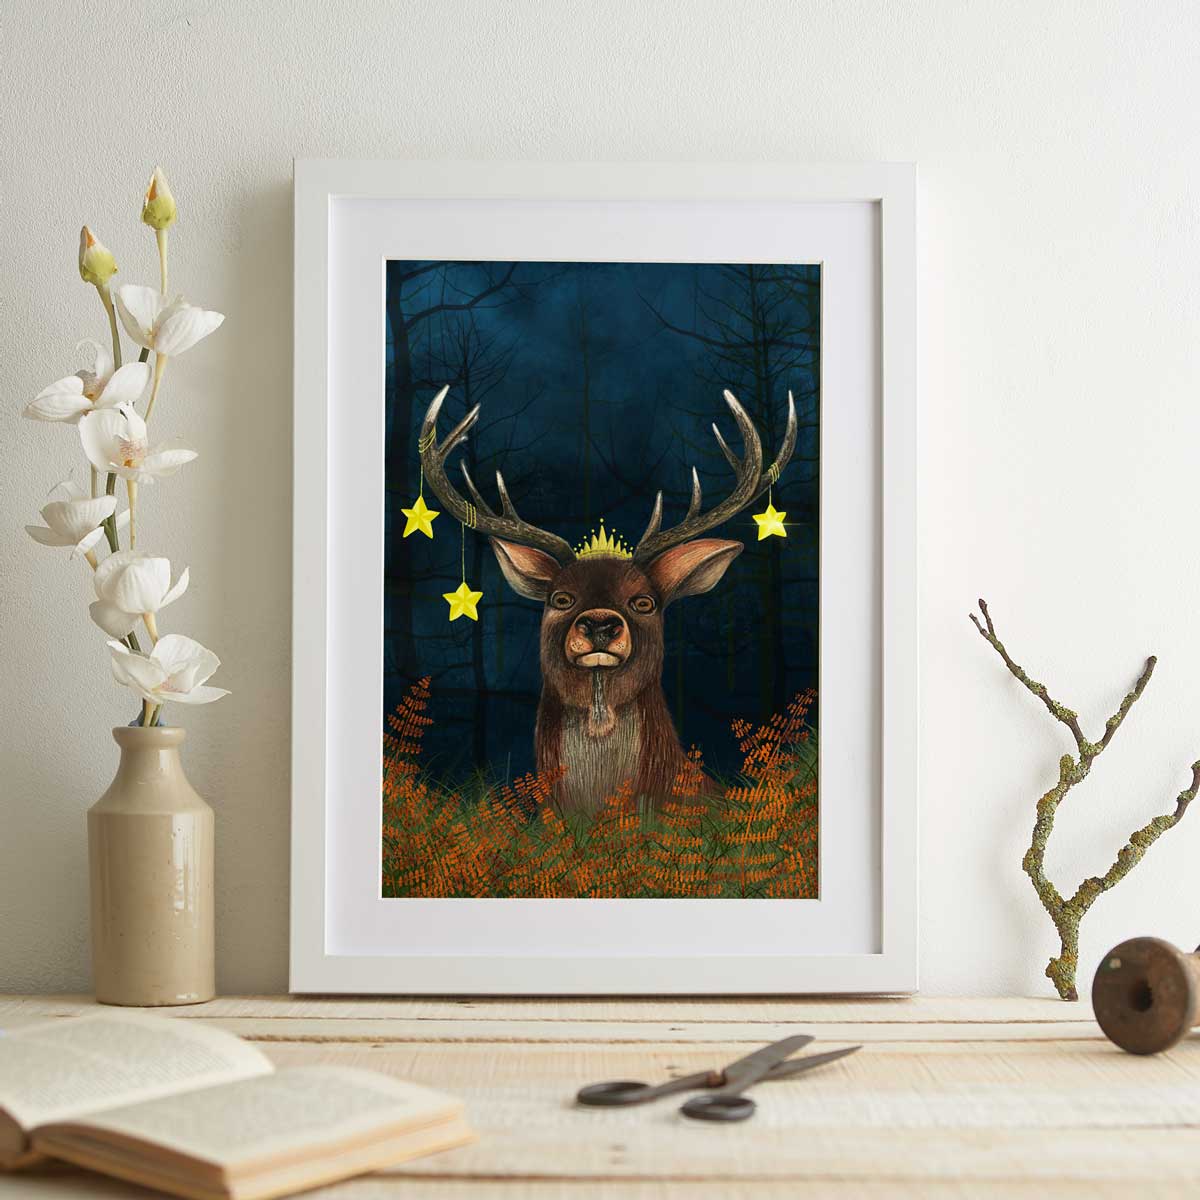 Illustration of a stag wearing a crown and stars